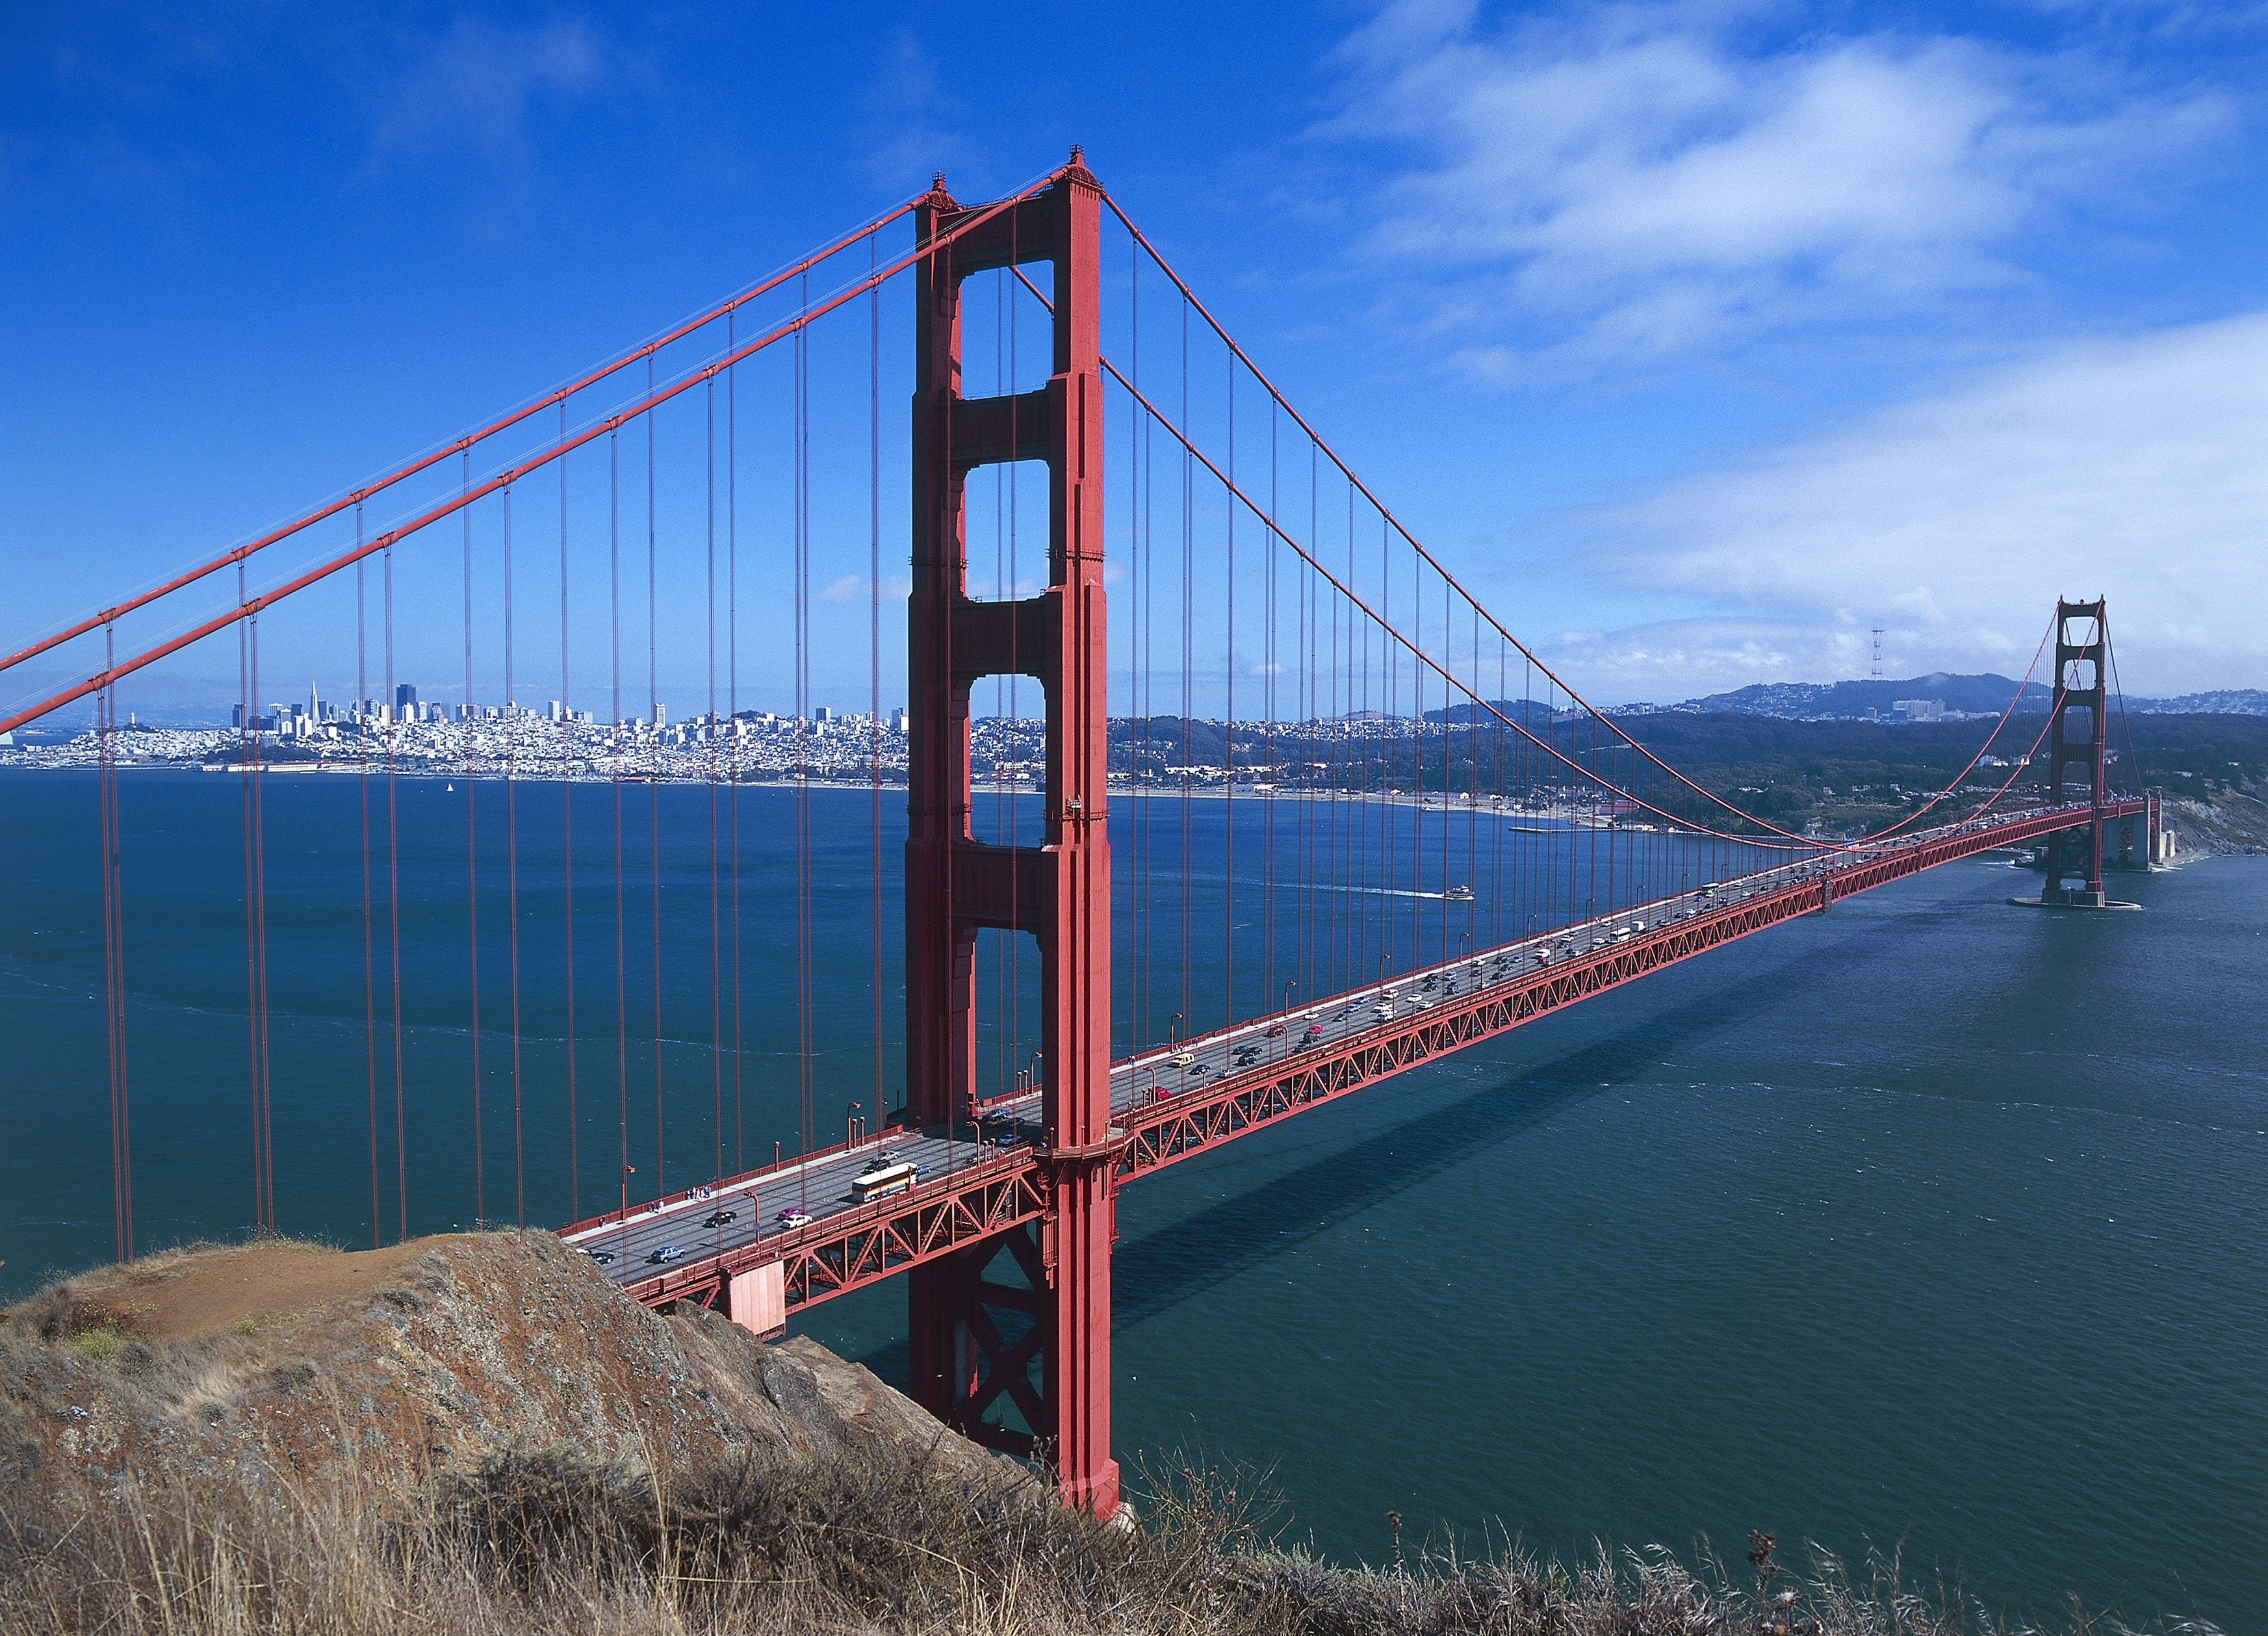 The Golden Gate Bridge by Joseph Baermann Strauss, with the bay and the city of San Francisco in the background, California, United States of America. (DEA / M. SANTINI&mdash;De Agostini/Getty Images)